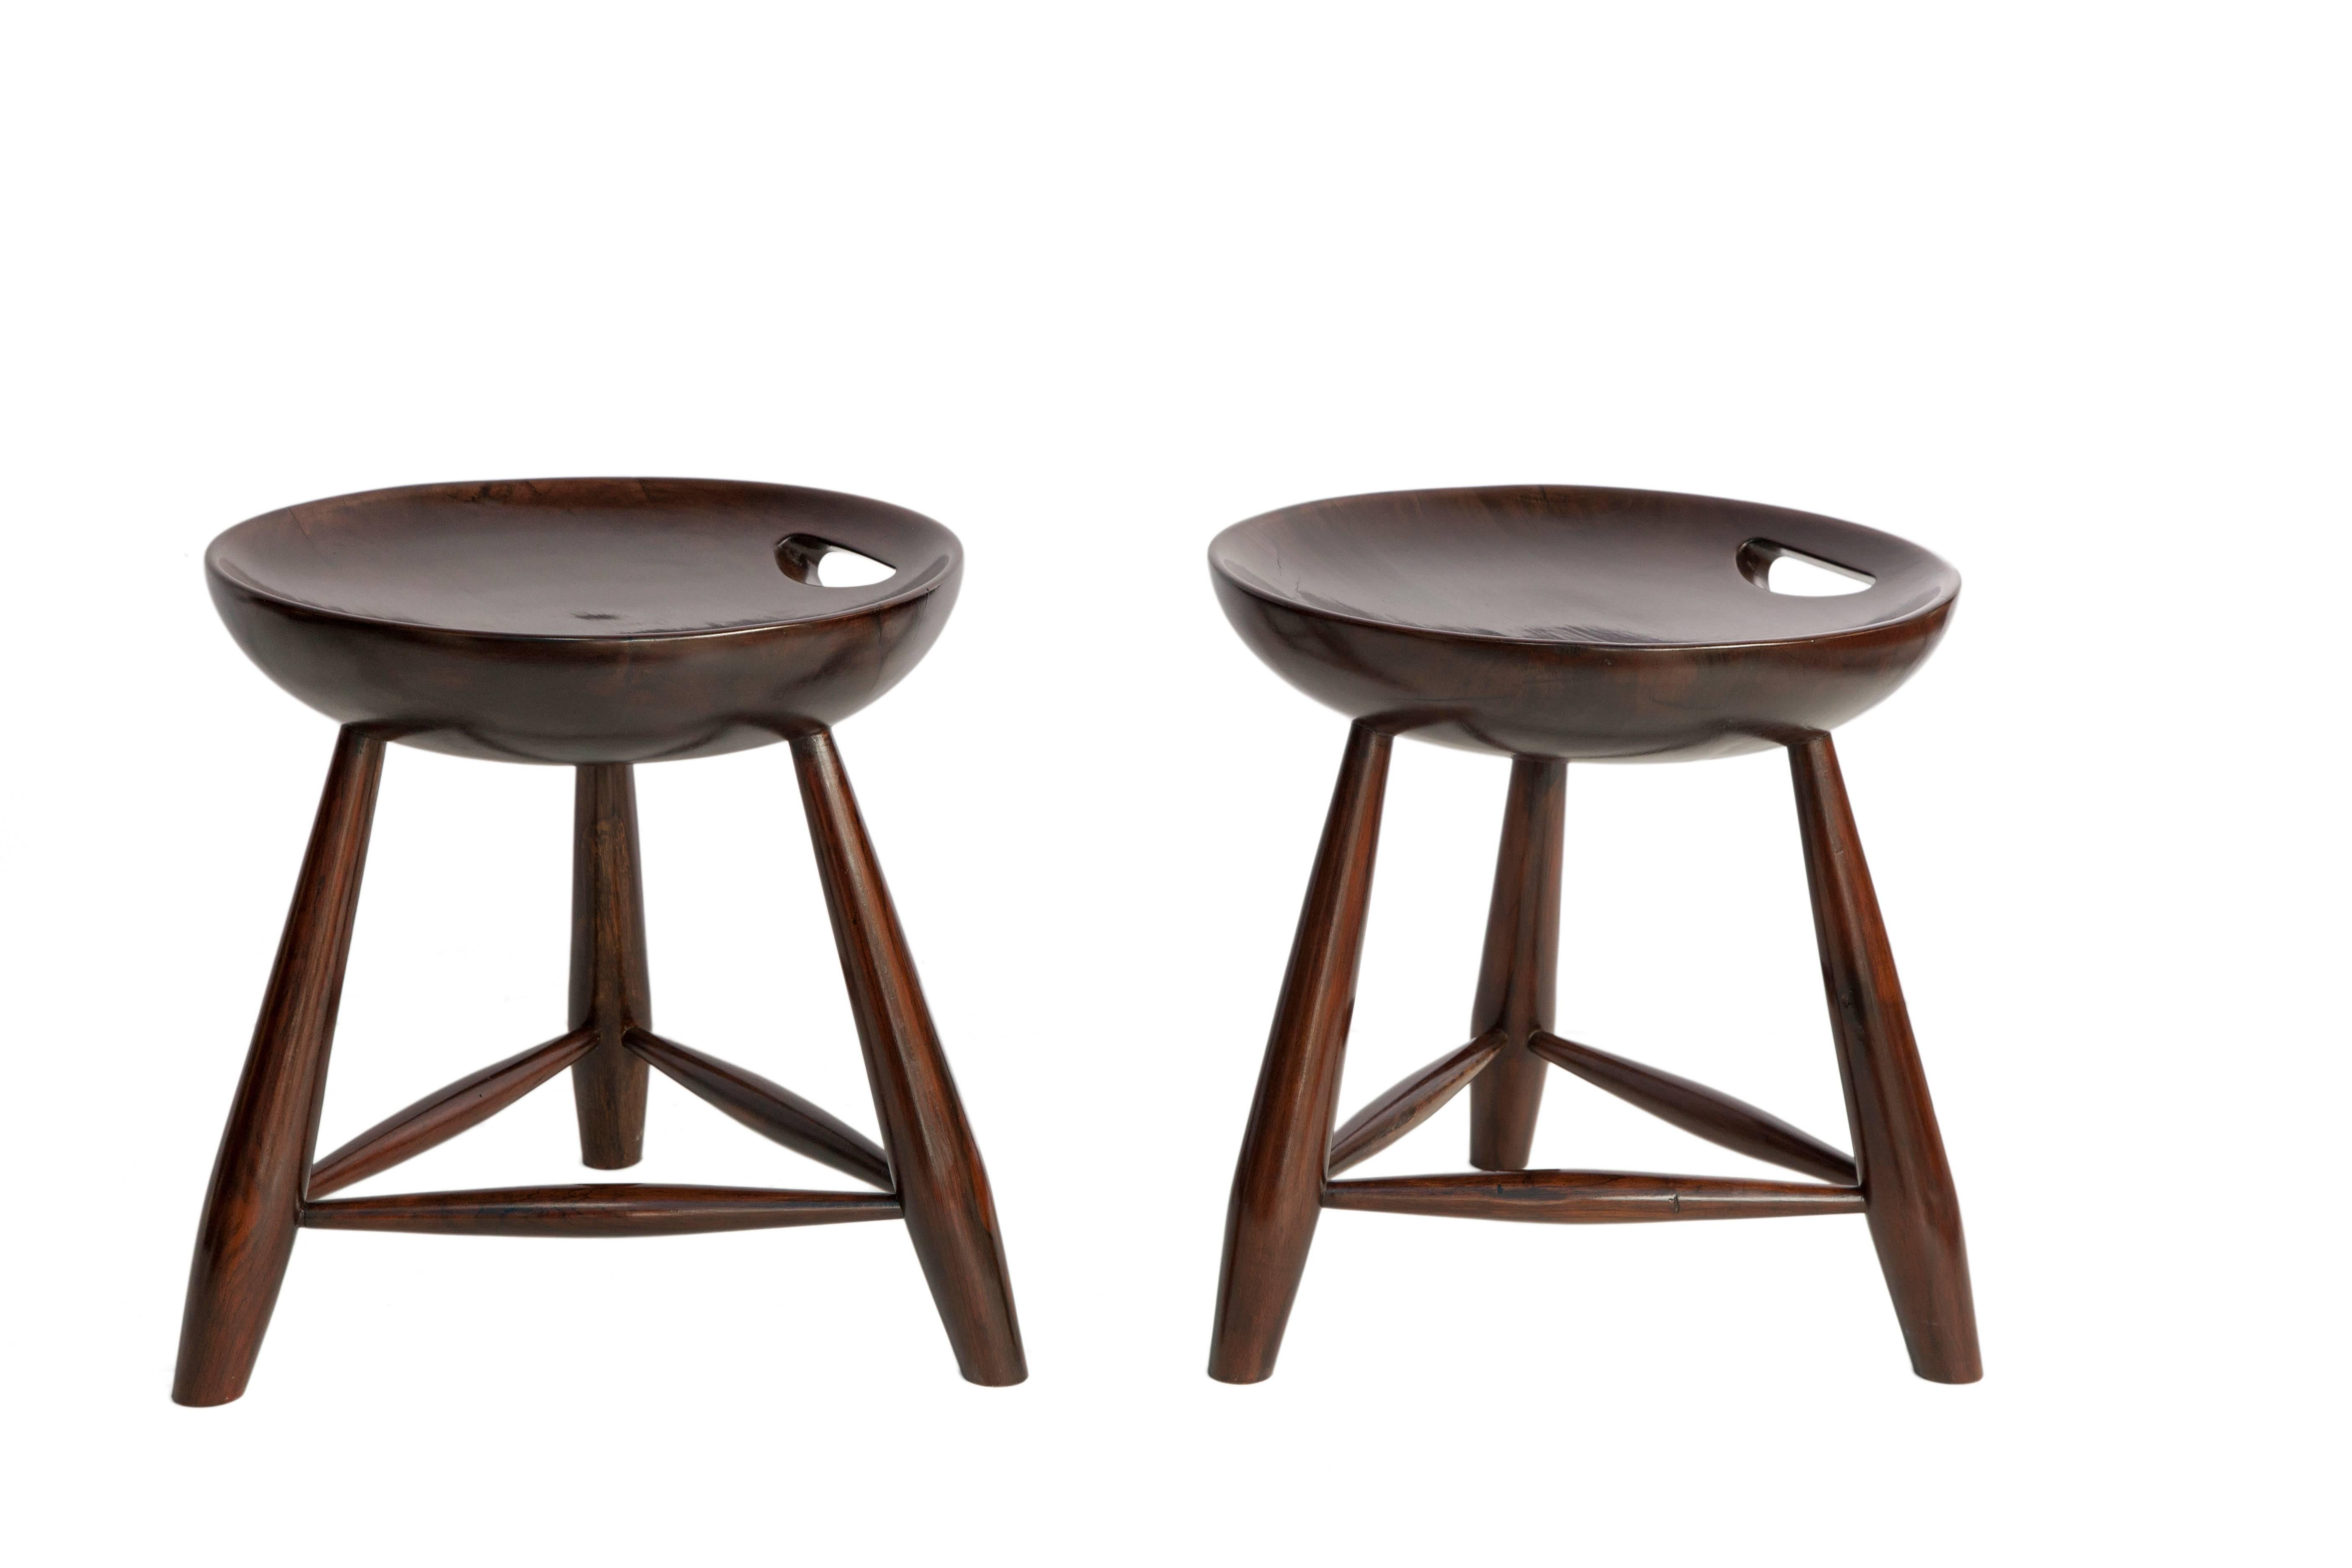 Mid-Century Modern 'Mocho' stools in jacaranda´ wood by Brazilian designer Sergio Rodrigues. Each with concave seat and handle, on turned bulbous form legs with spreader bars. Good vintage condition, consistent with age and use.